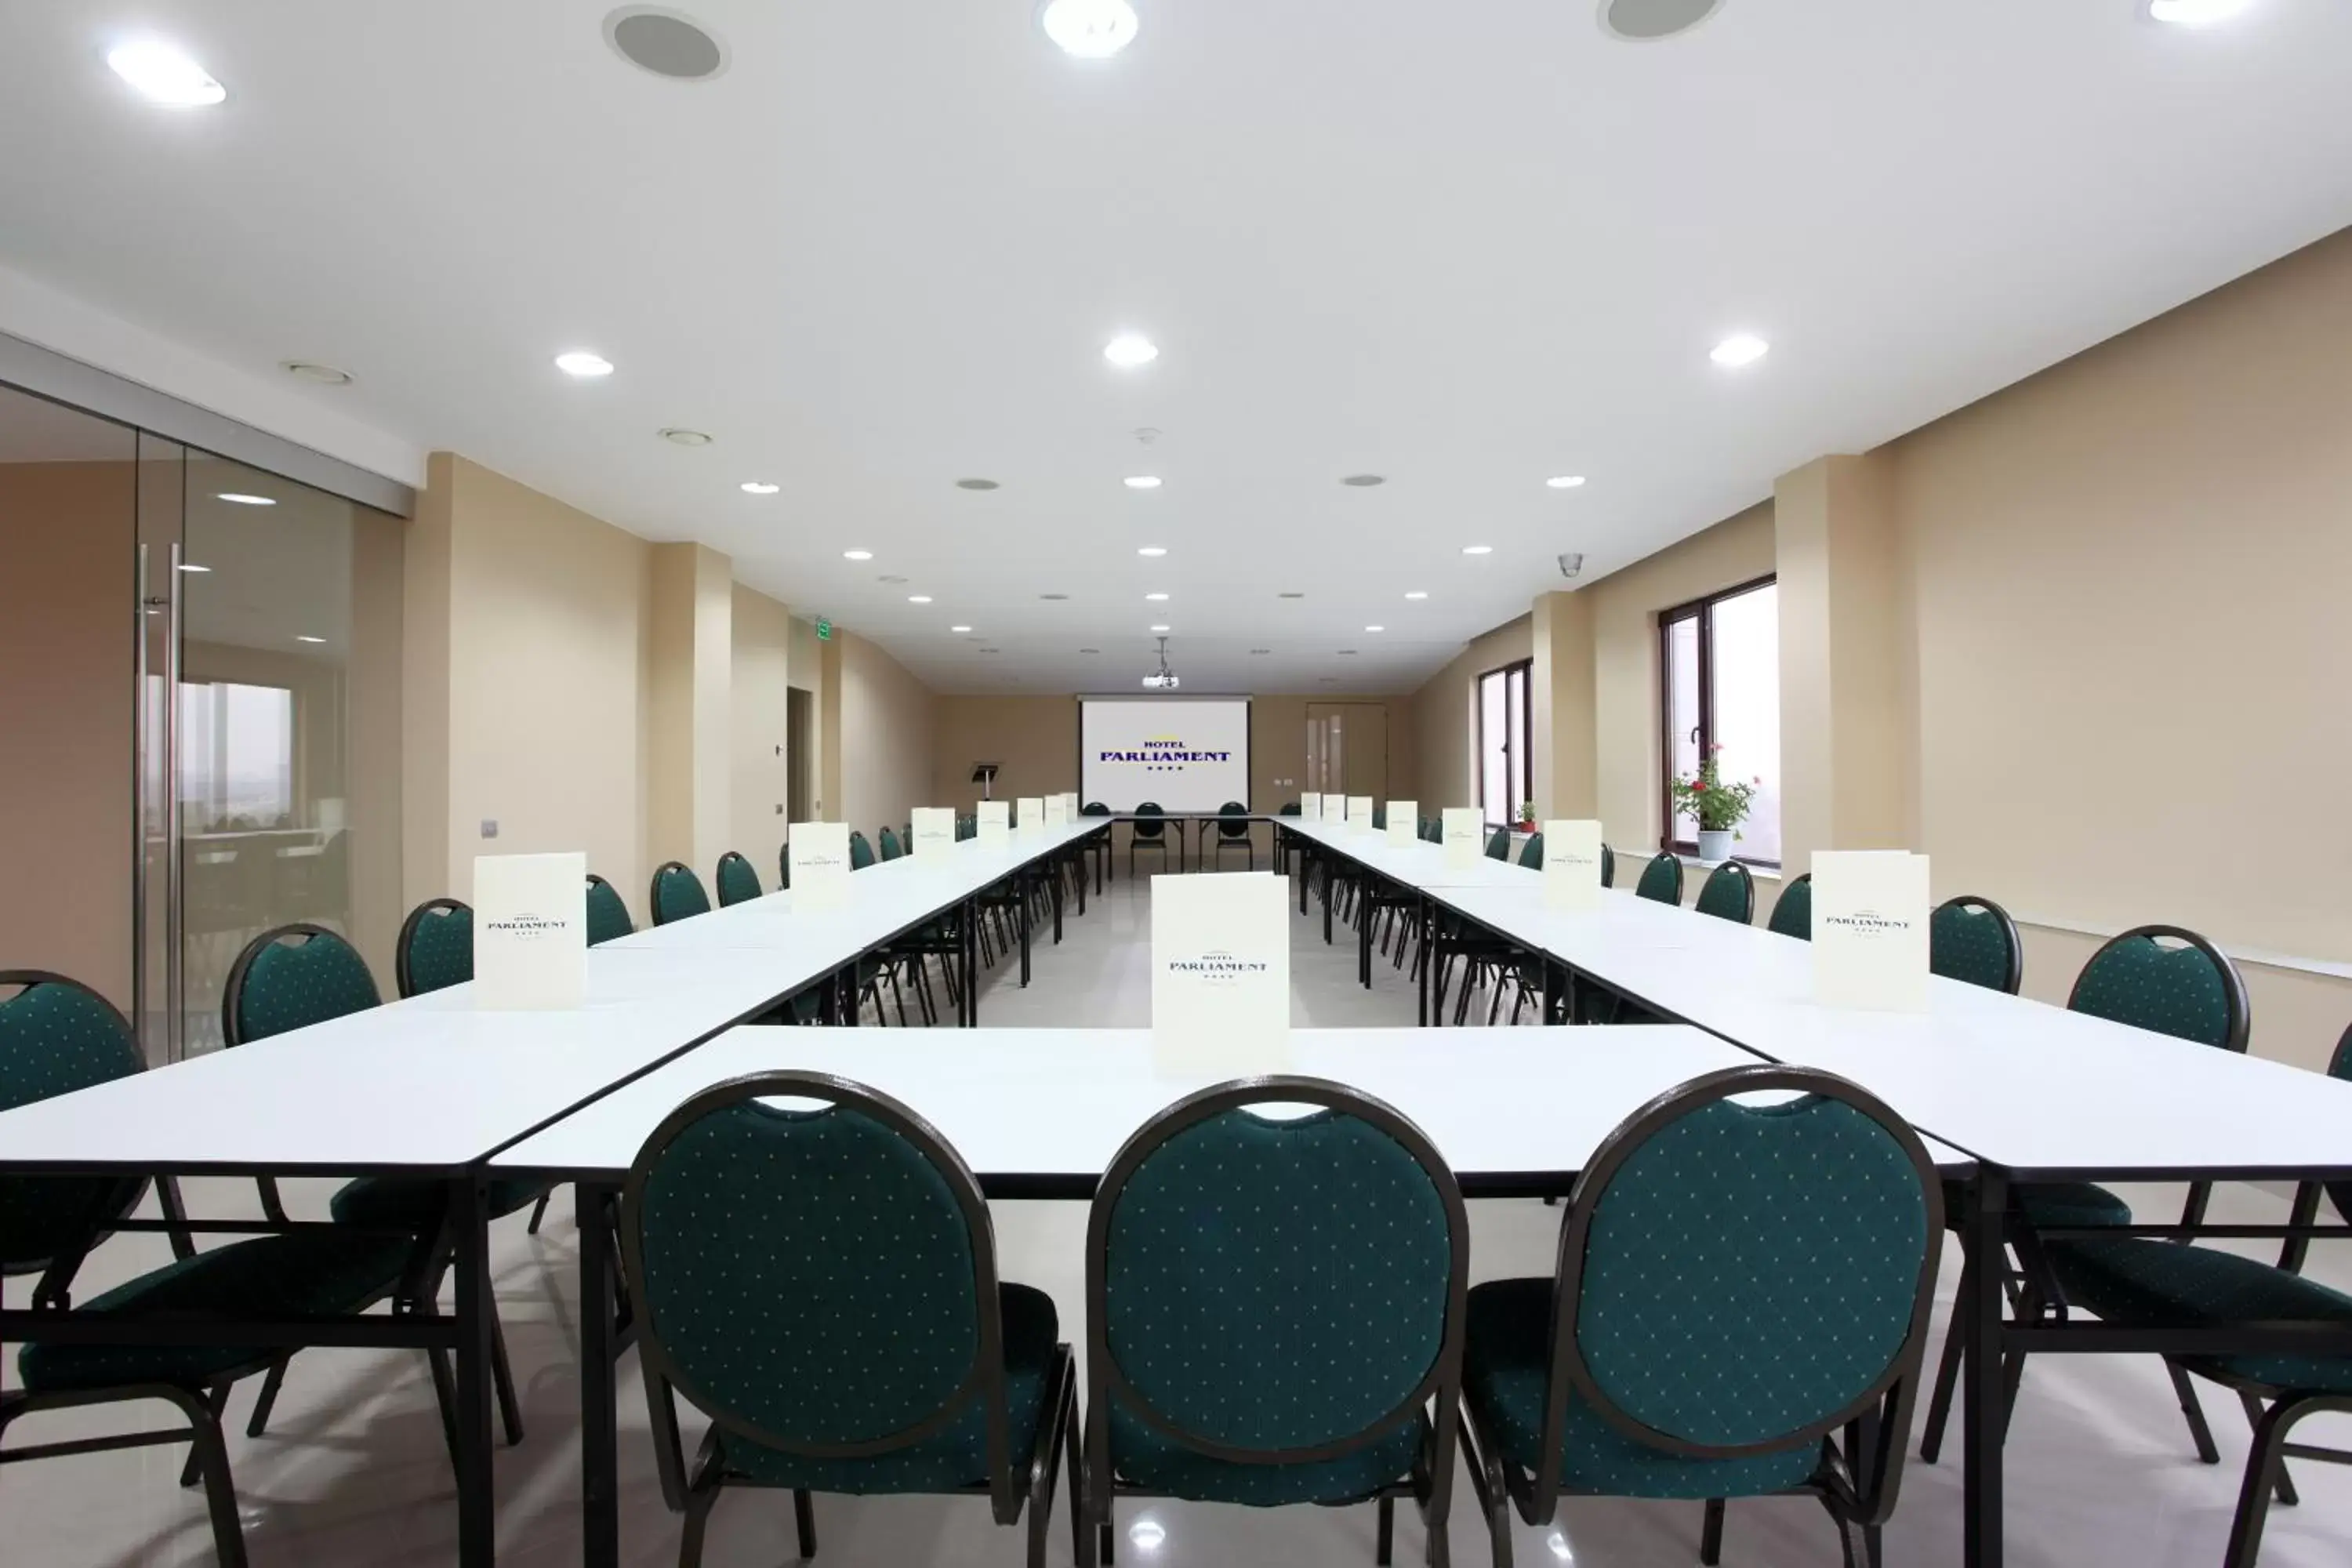 Business facilities in Hotel Parliament